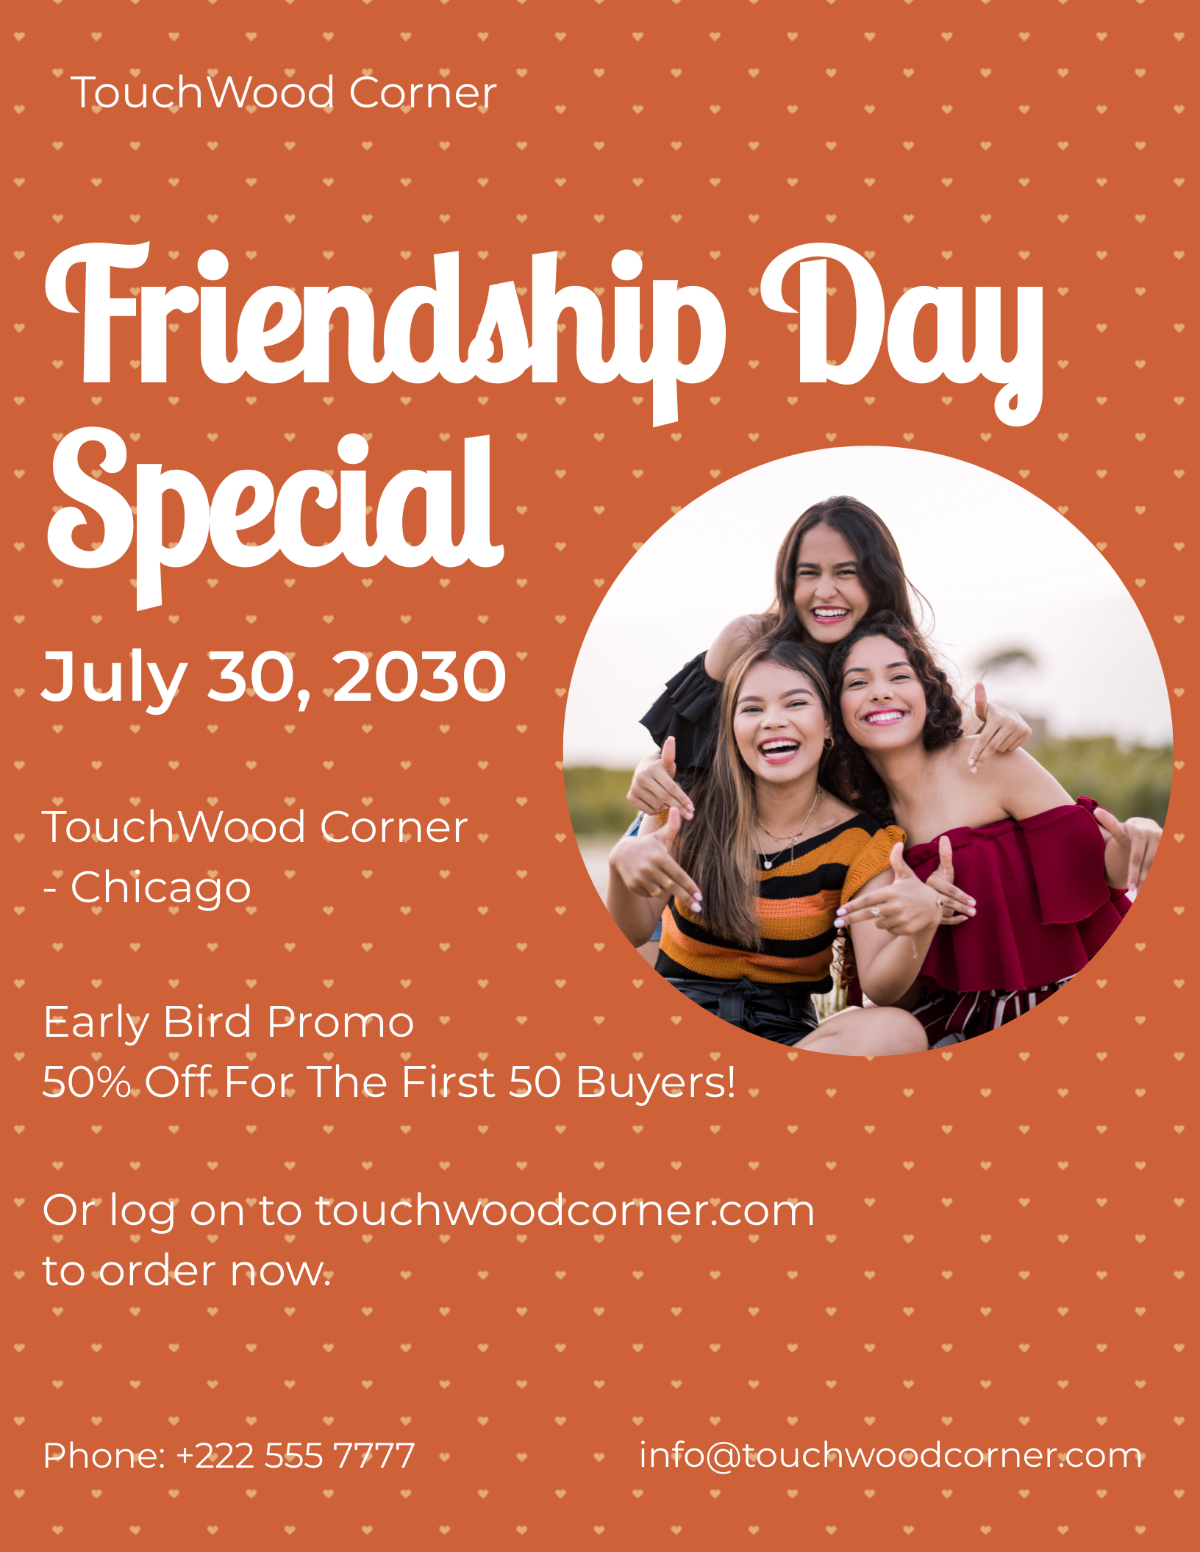 Friendship Day Flyer Template